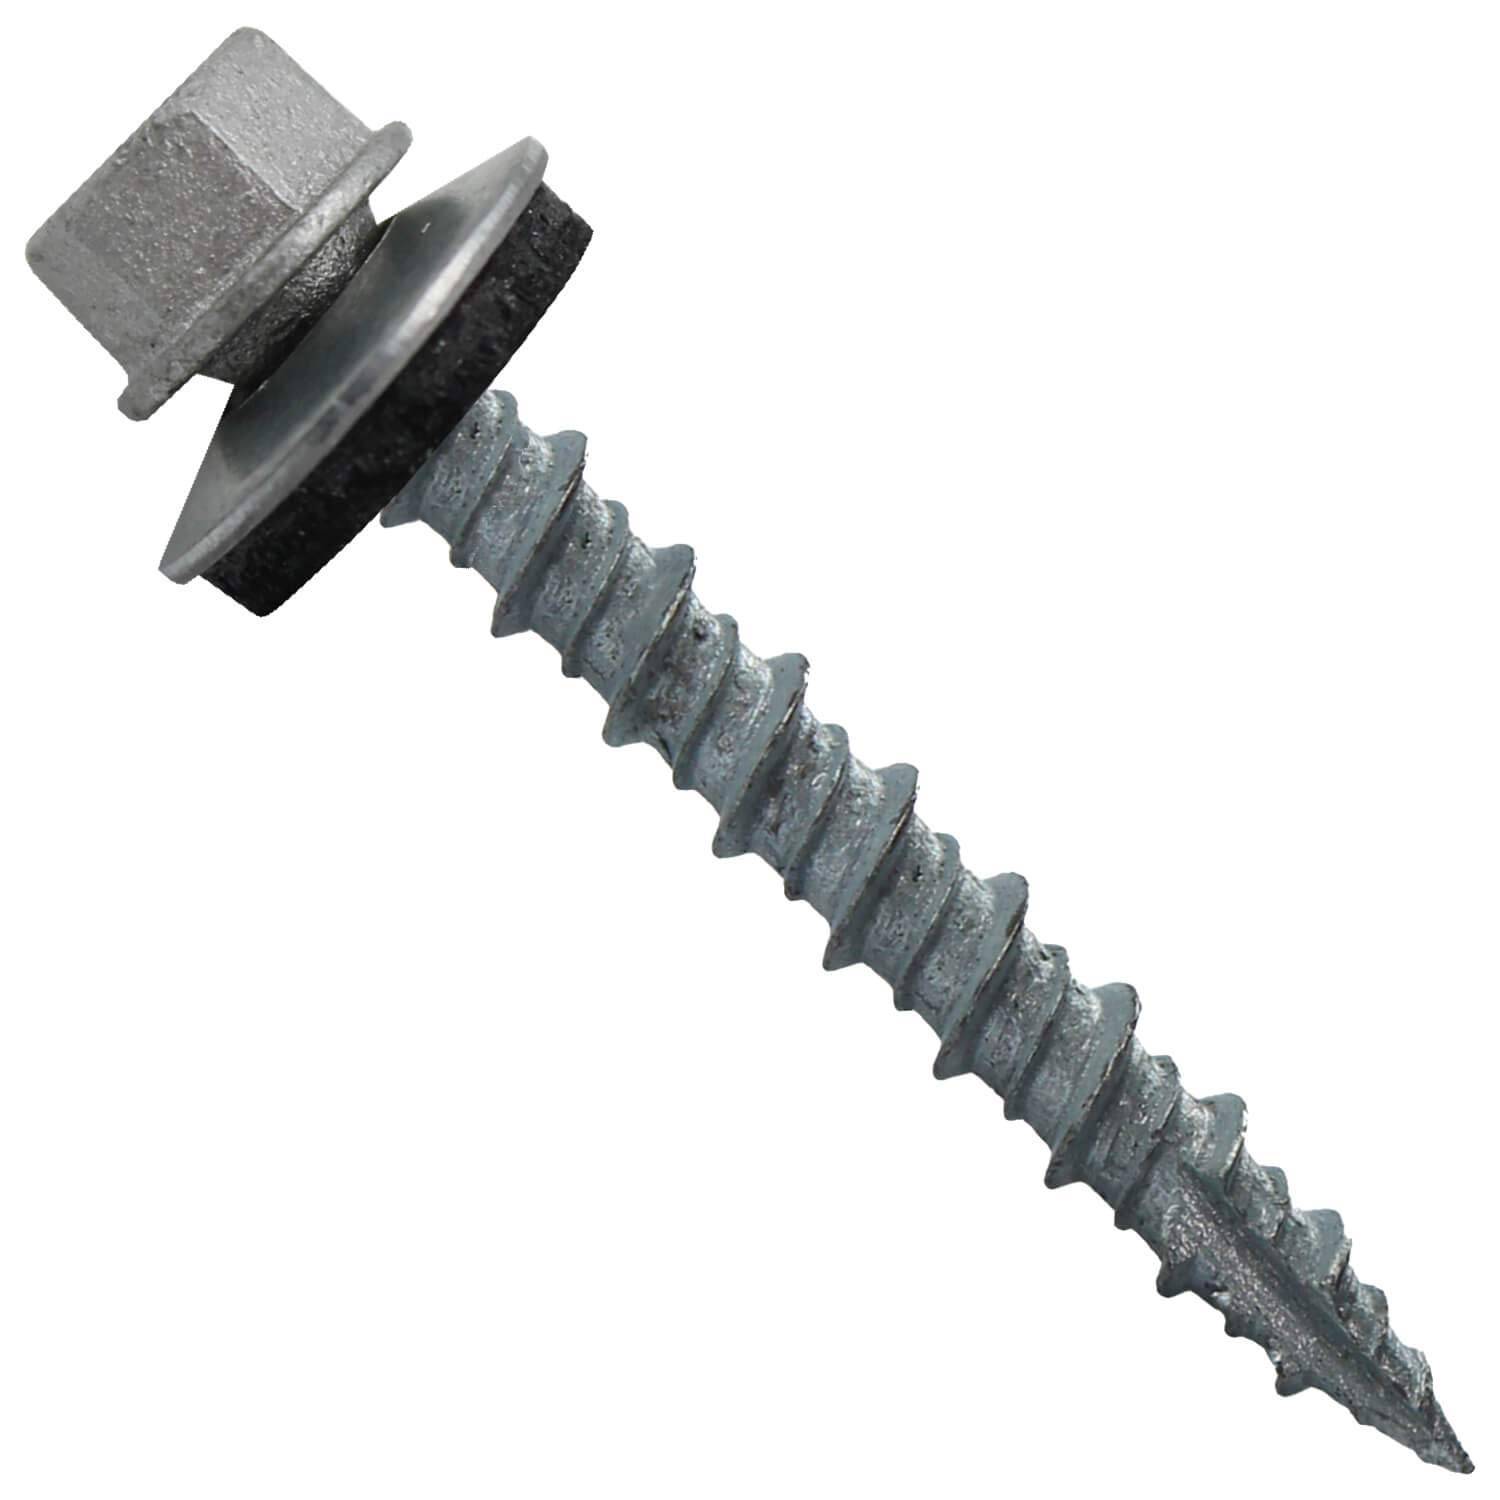 Product picture of self-taping metal roofing screw with rubber gasket.